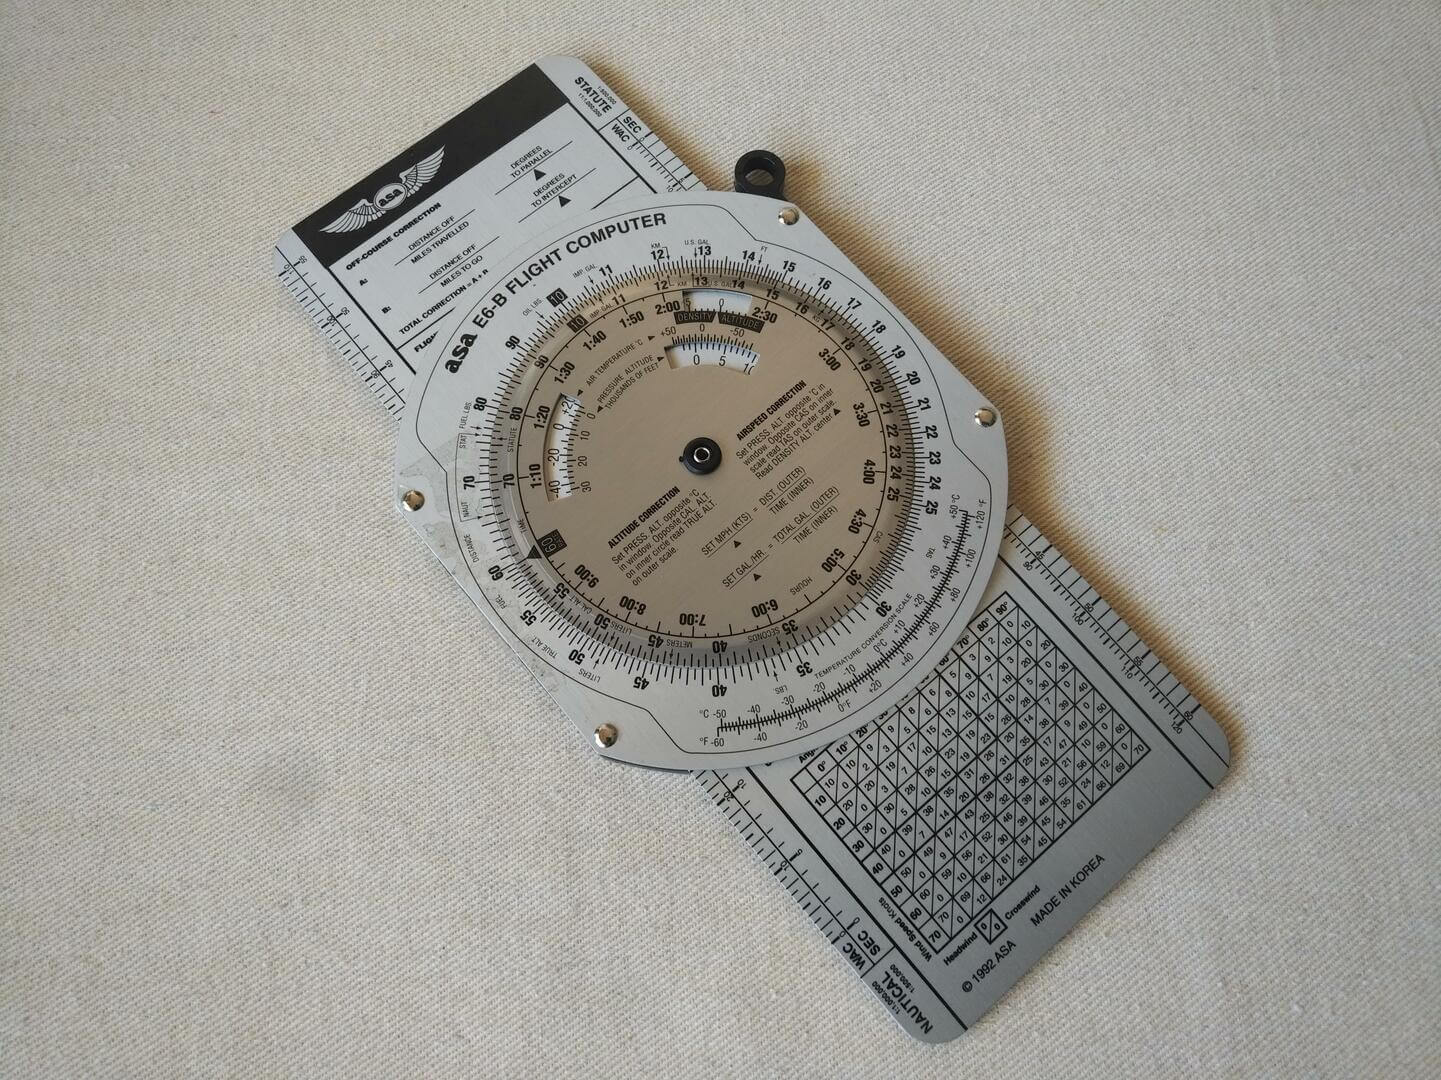 ASA Color E6-B solid aluminum manual flight computer slide-rule-style flight computer used for calculations and conversions for high-speed flight.